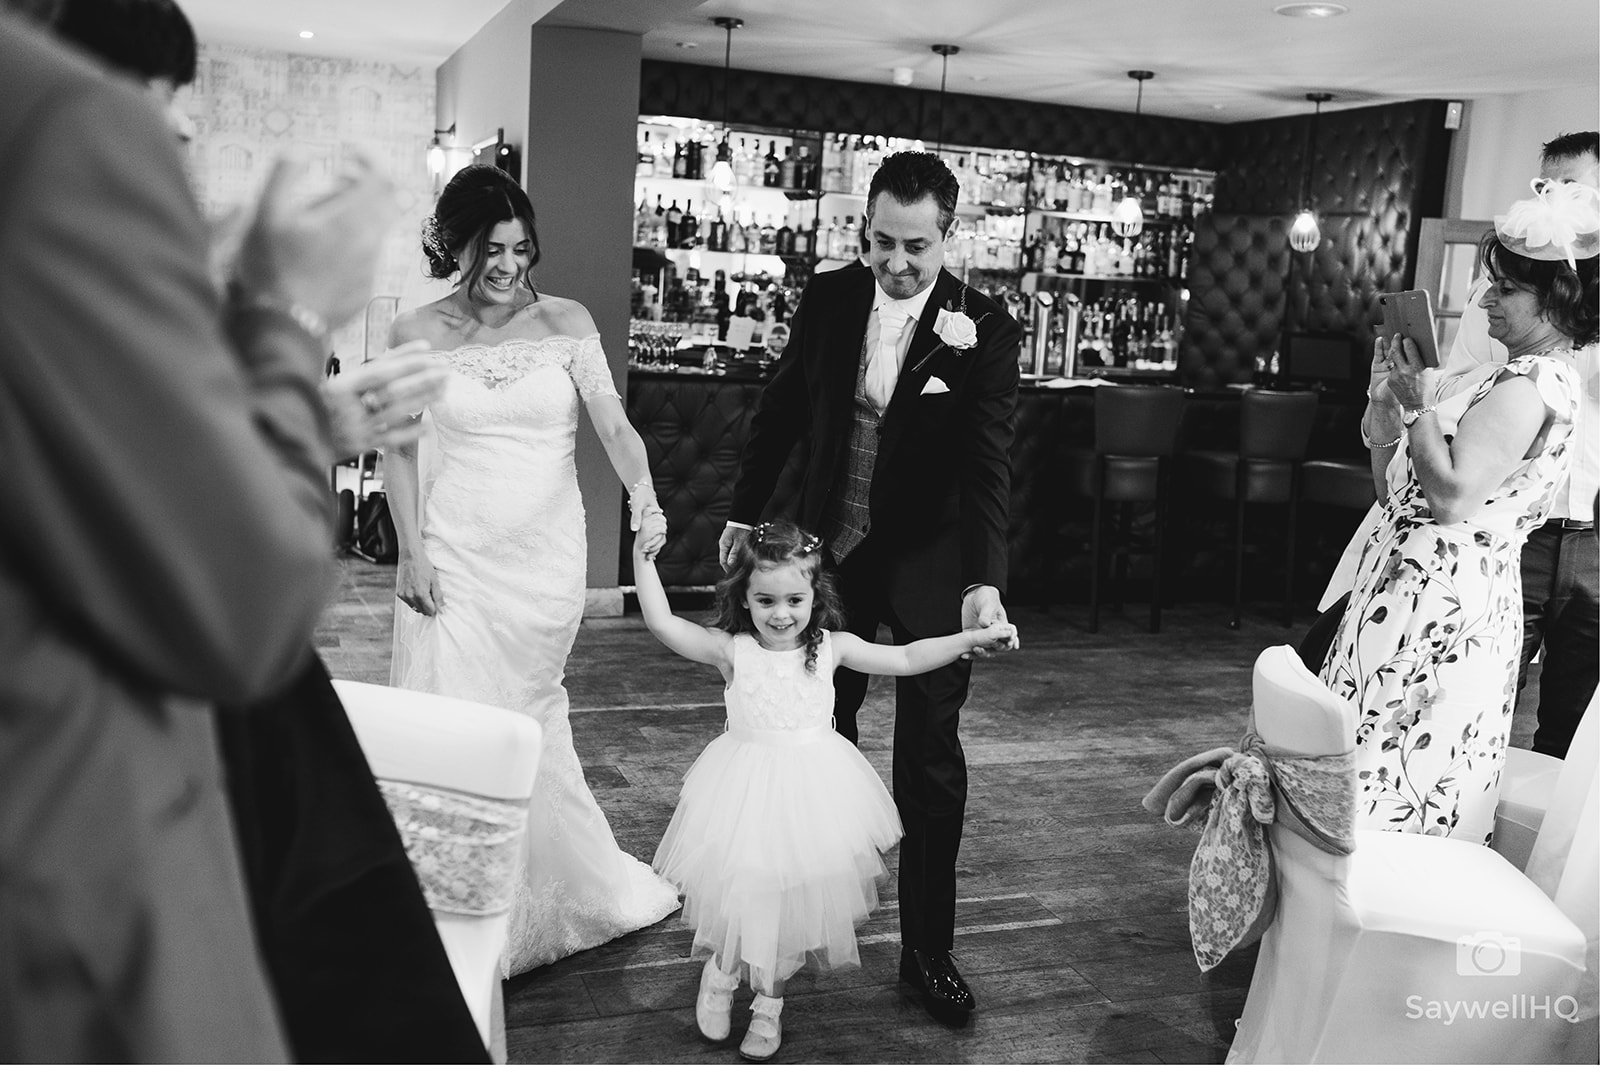 The Chequers Inn Wedding Photography - the bride and groom are announced into the wedding breakfast room